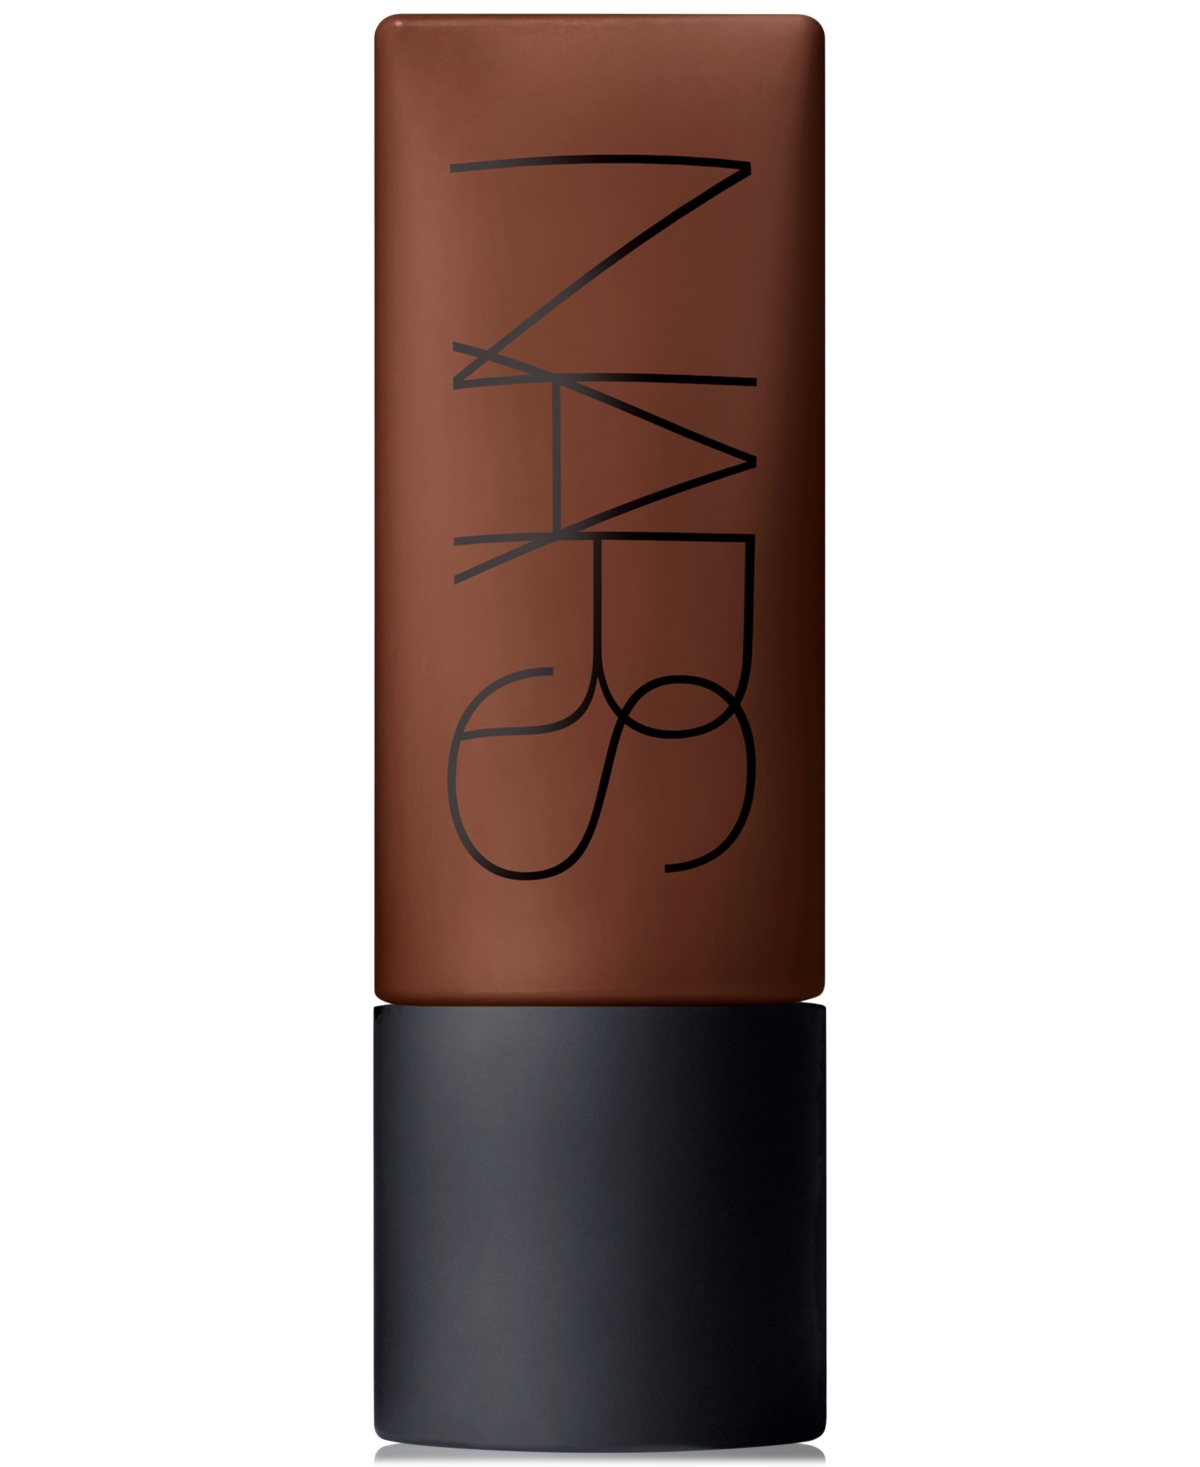 Nars Soft Matte Complete Foundation In Zambie